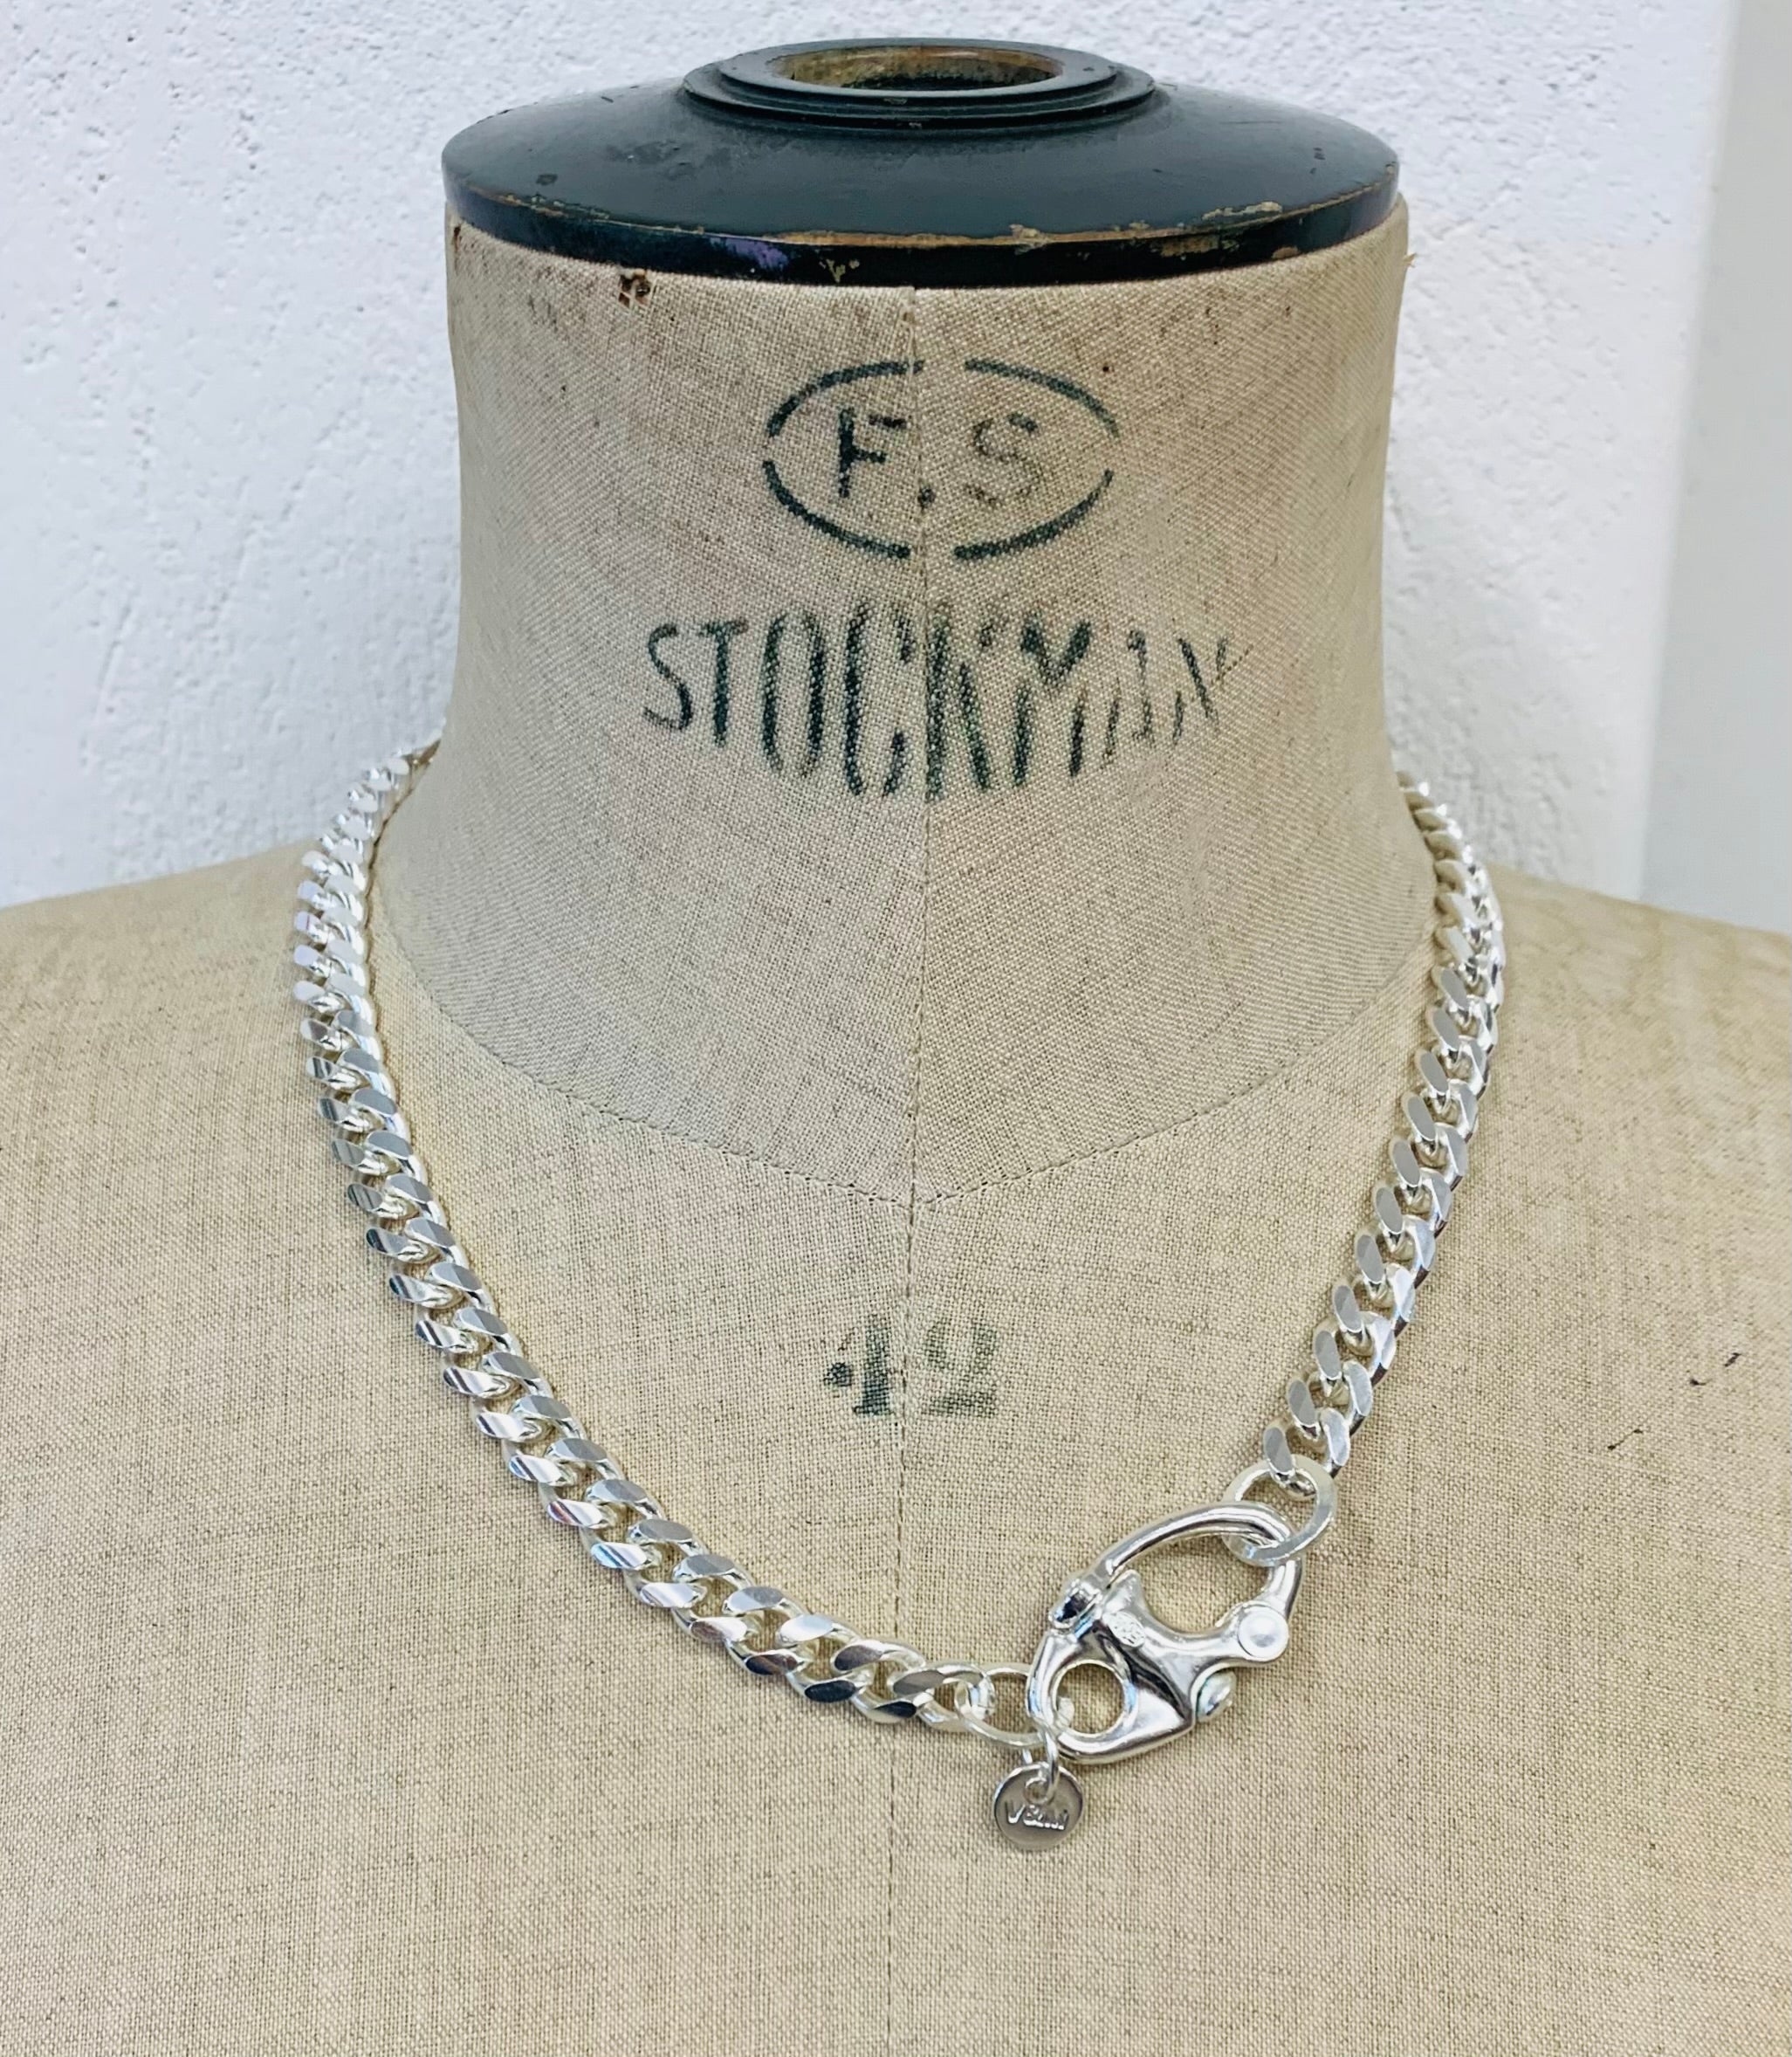 Chunky silver chain with boat clasp